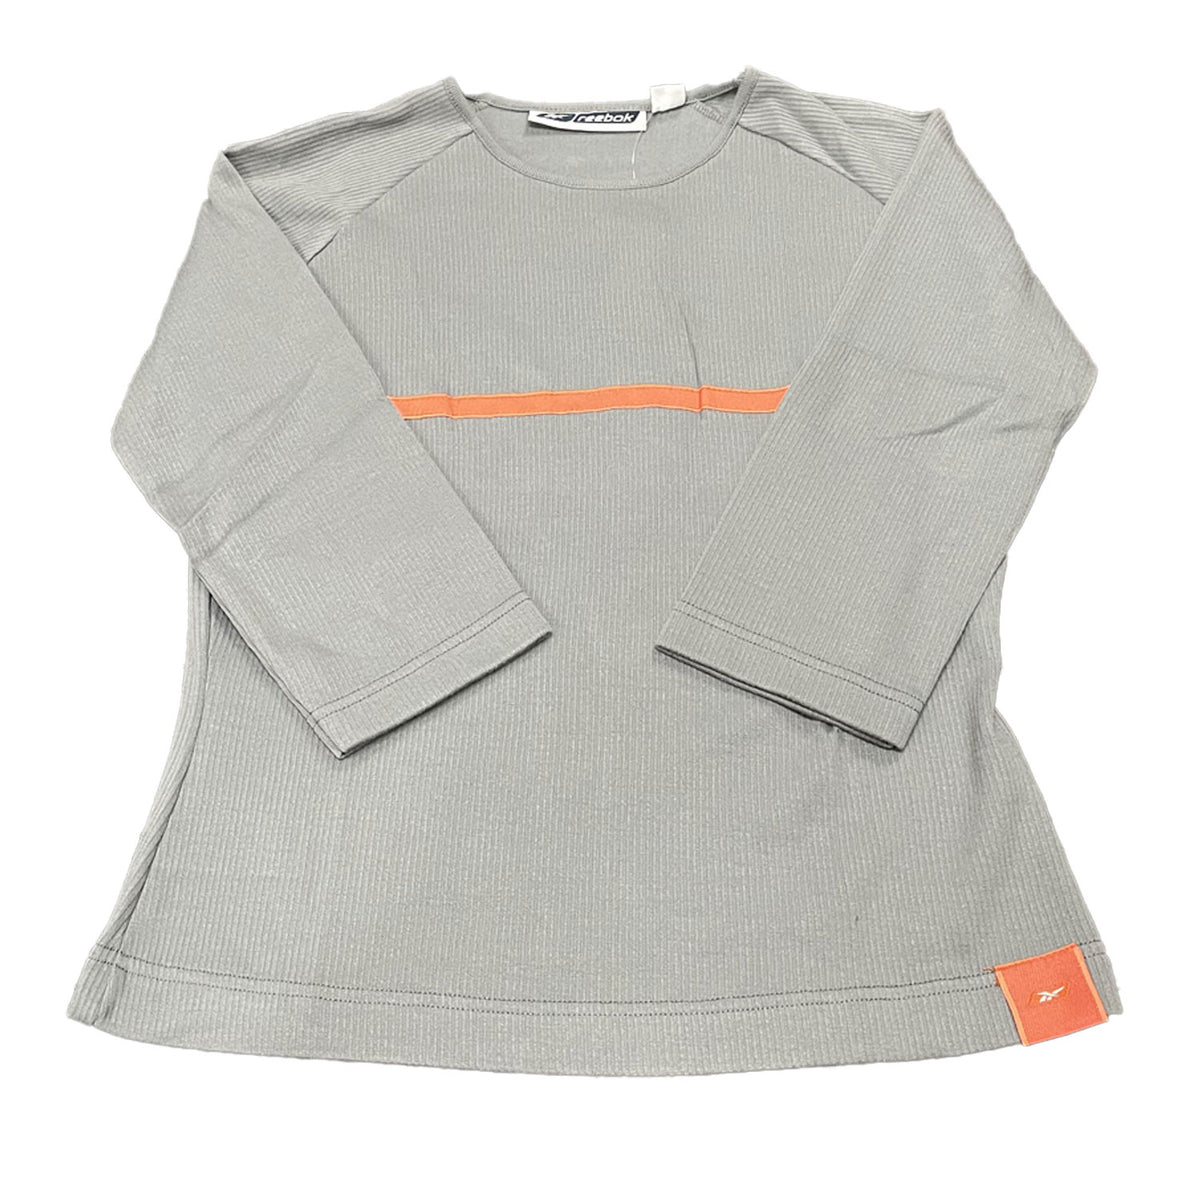 Reebok Womens Lined Freestyle Top 6 - RRP £14.99